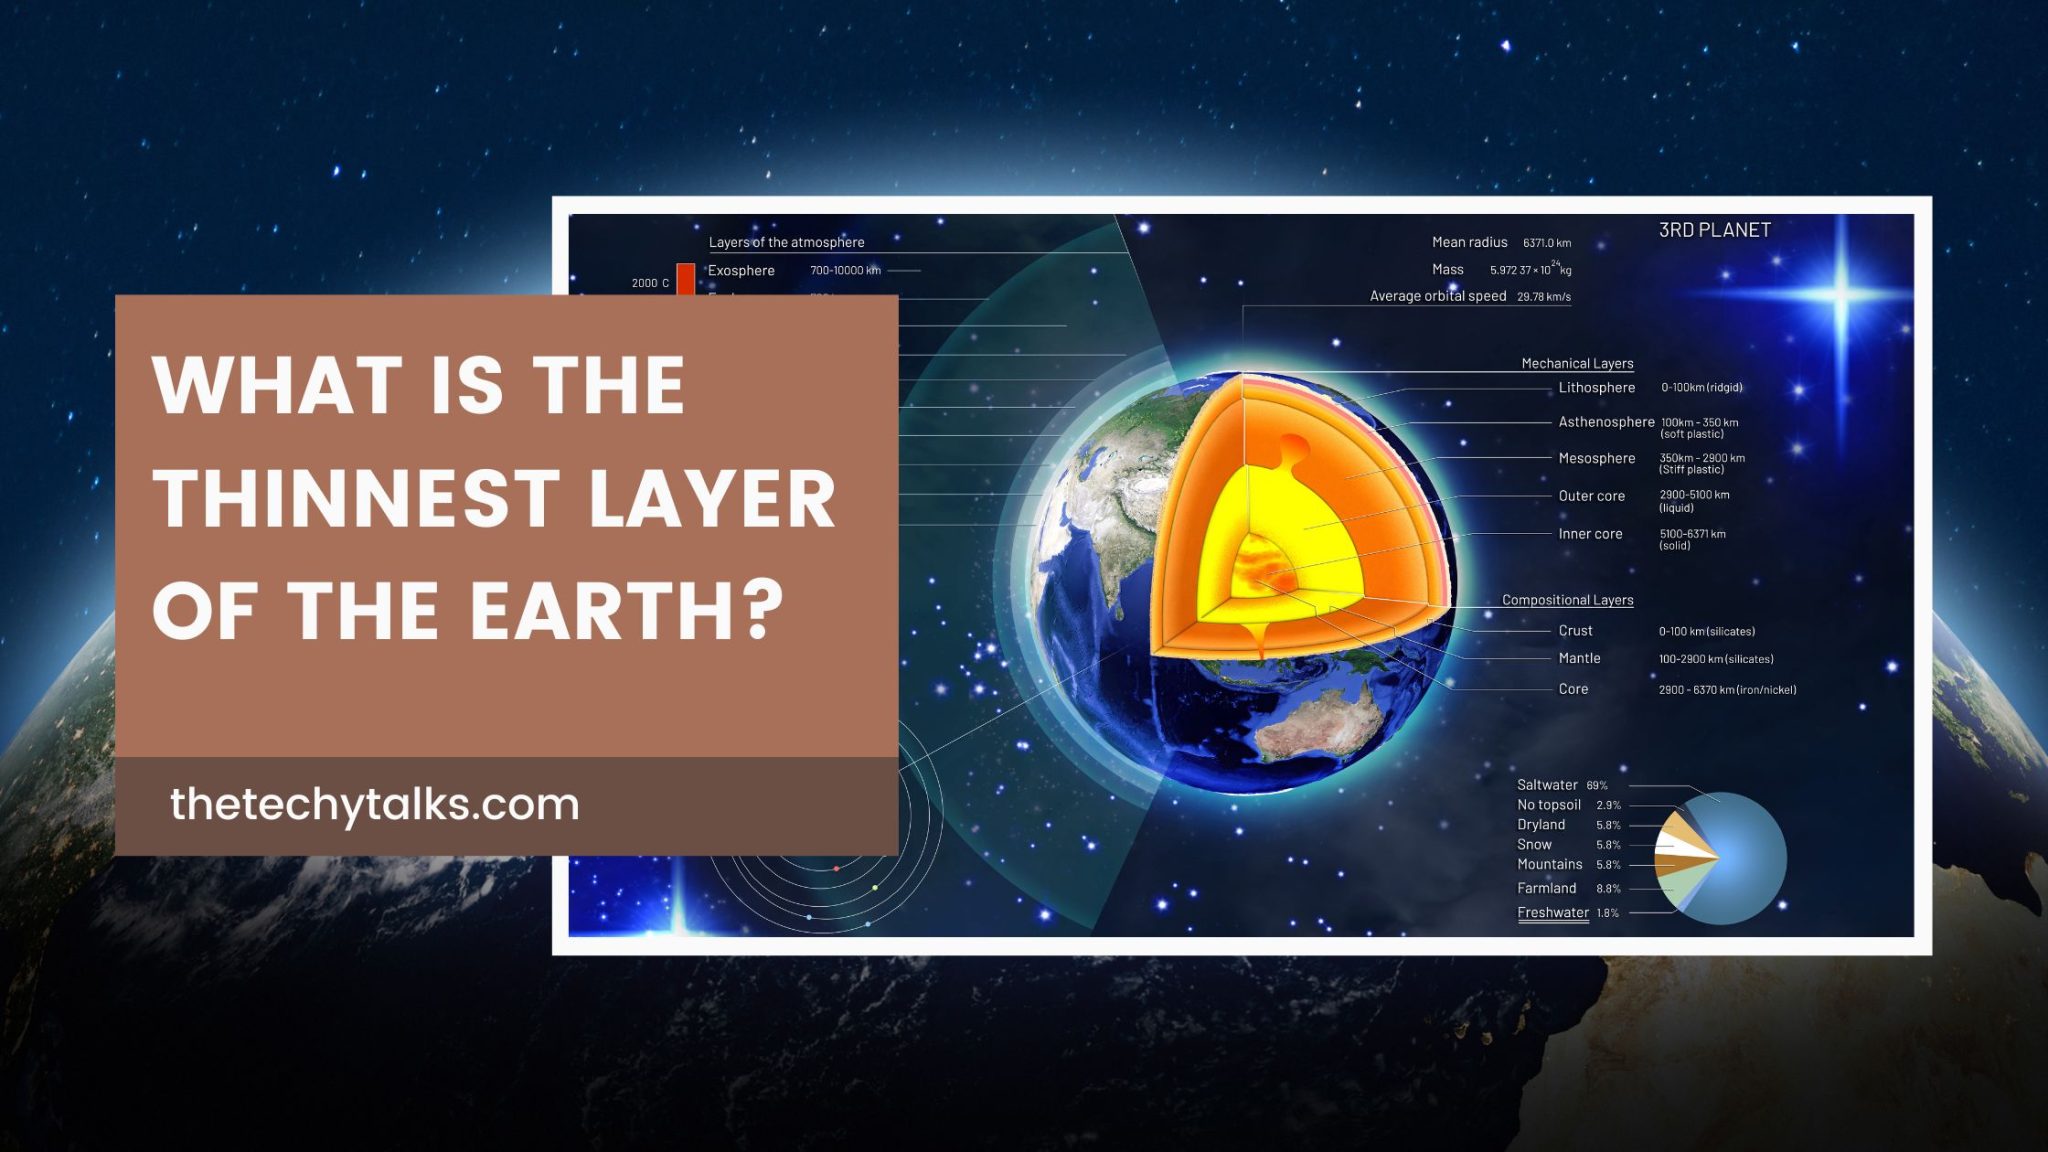 What is the thinnest layer of the Earth?